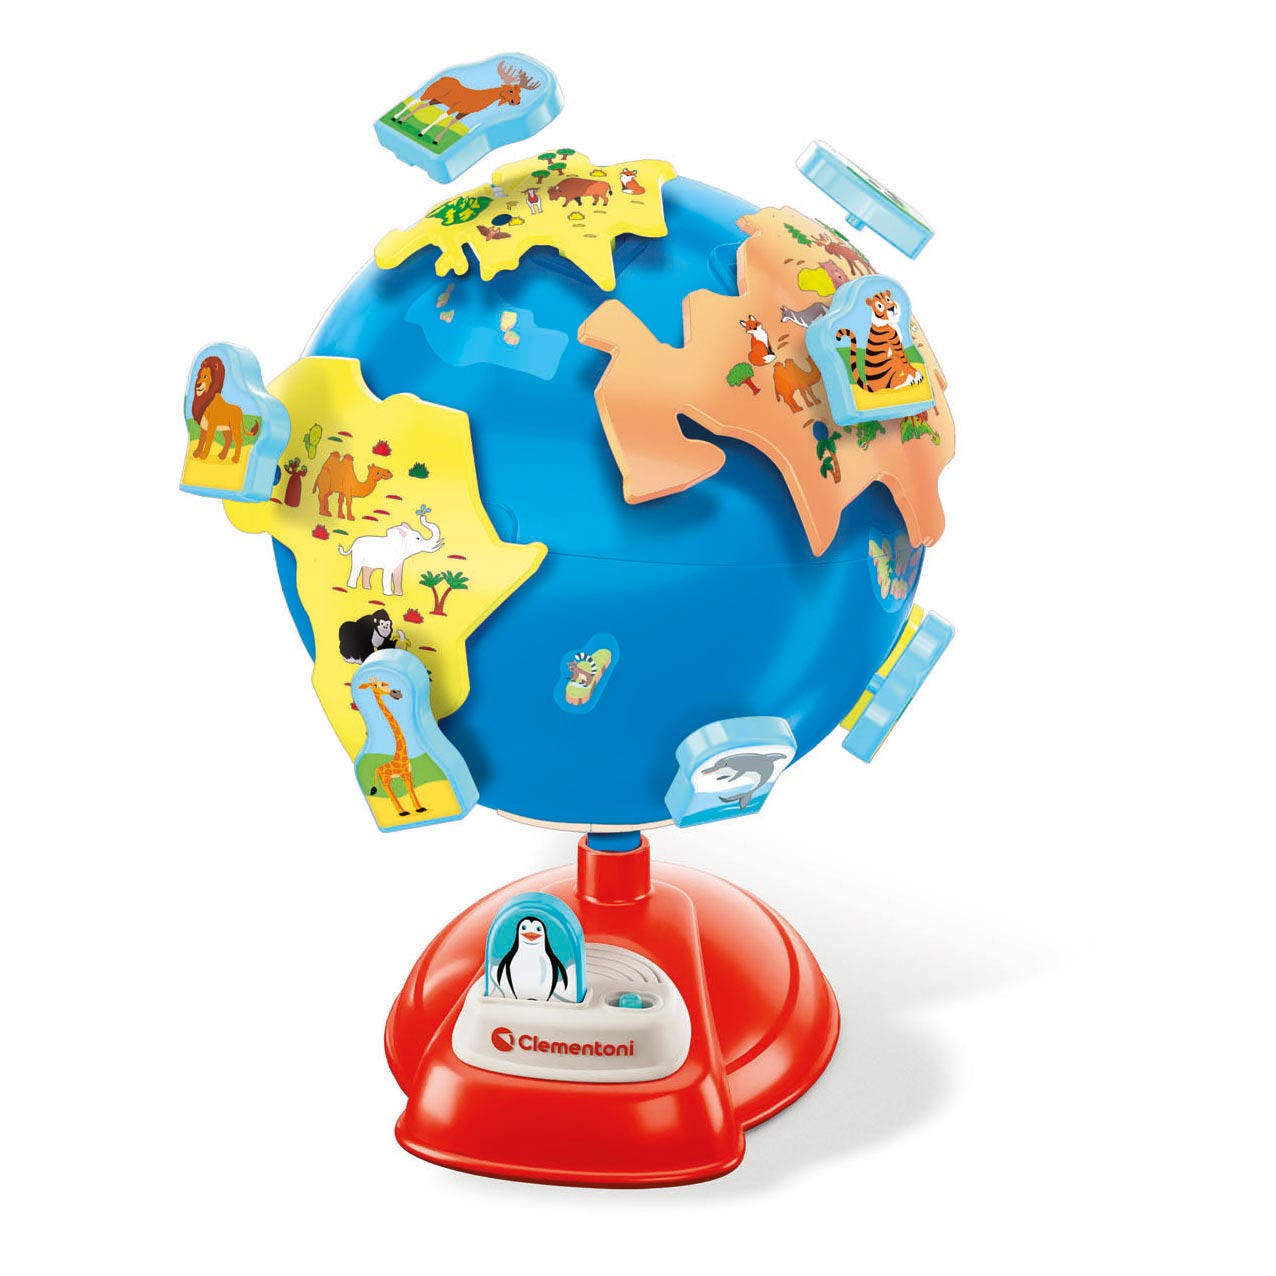 Clementoni Education - My First Globe Learning Game